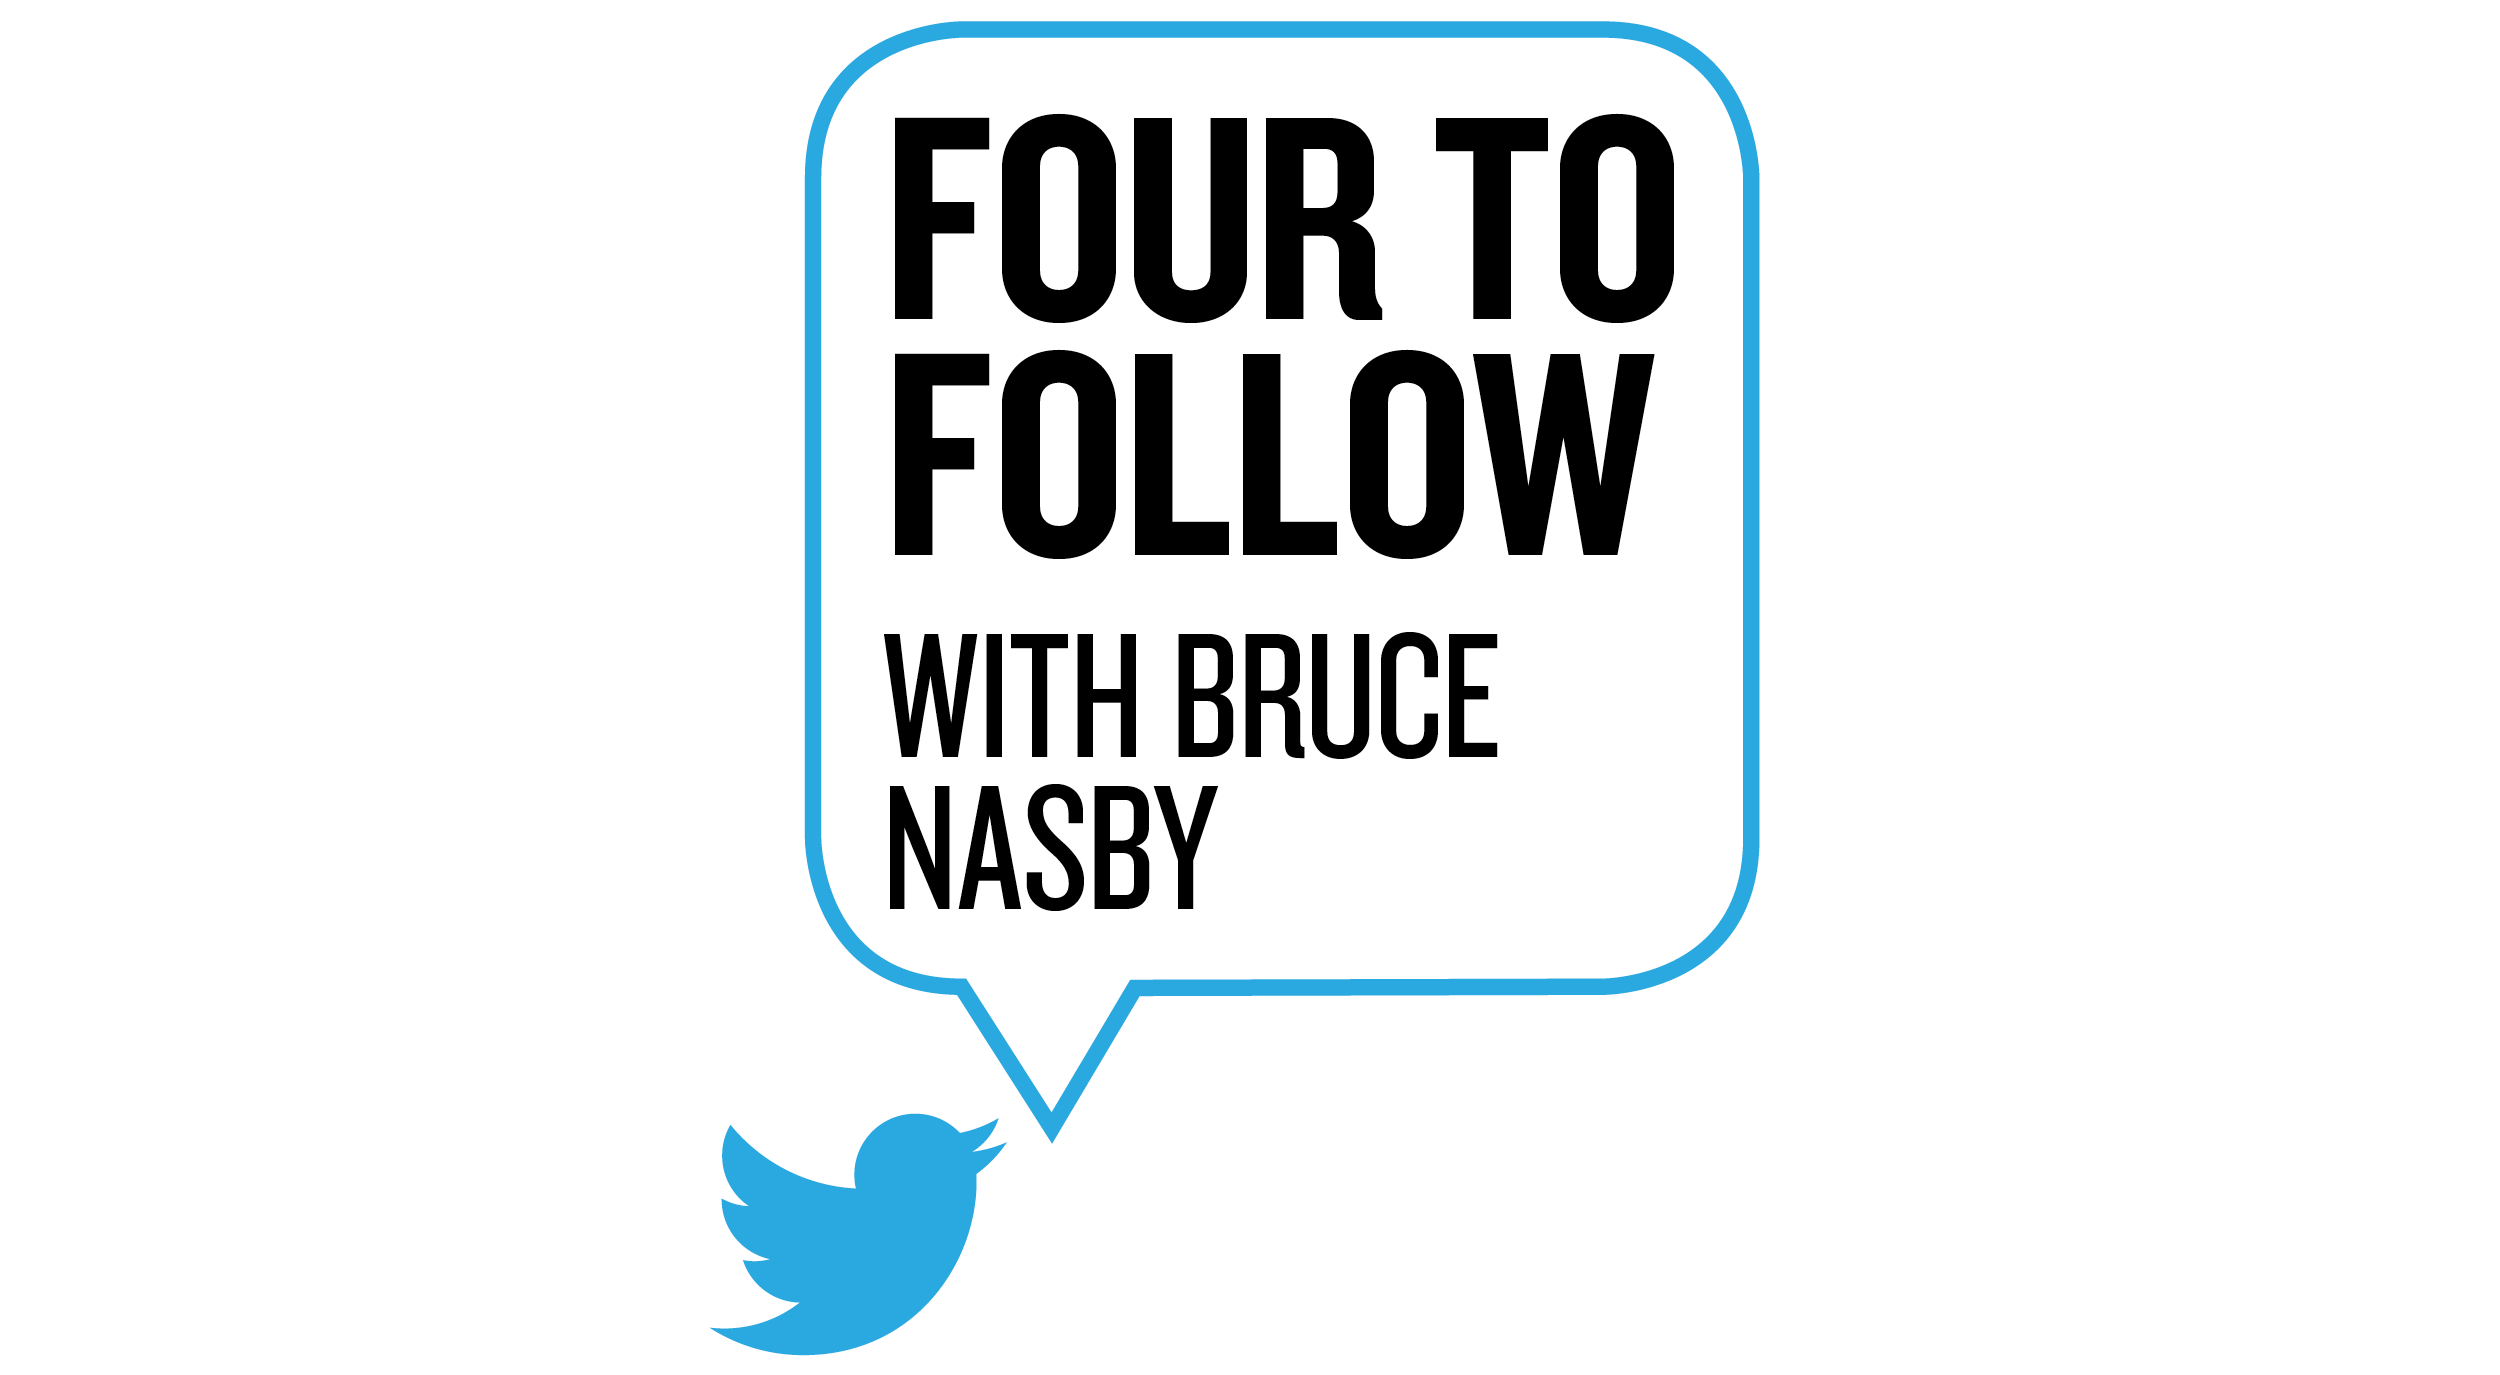 Four to follow with Bruce Nasby